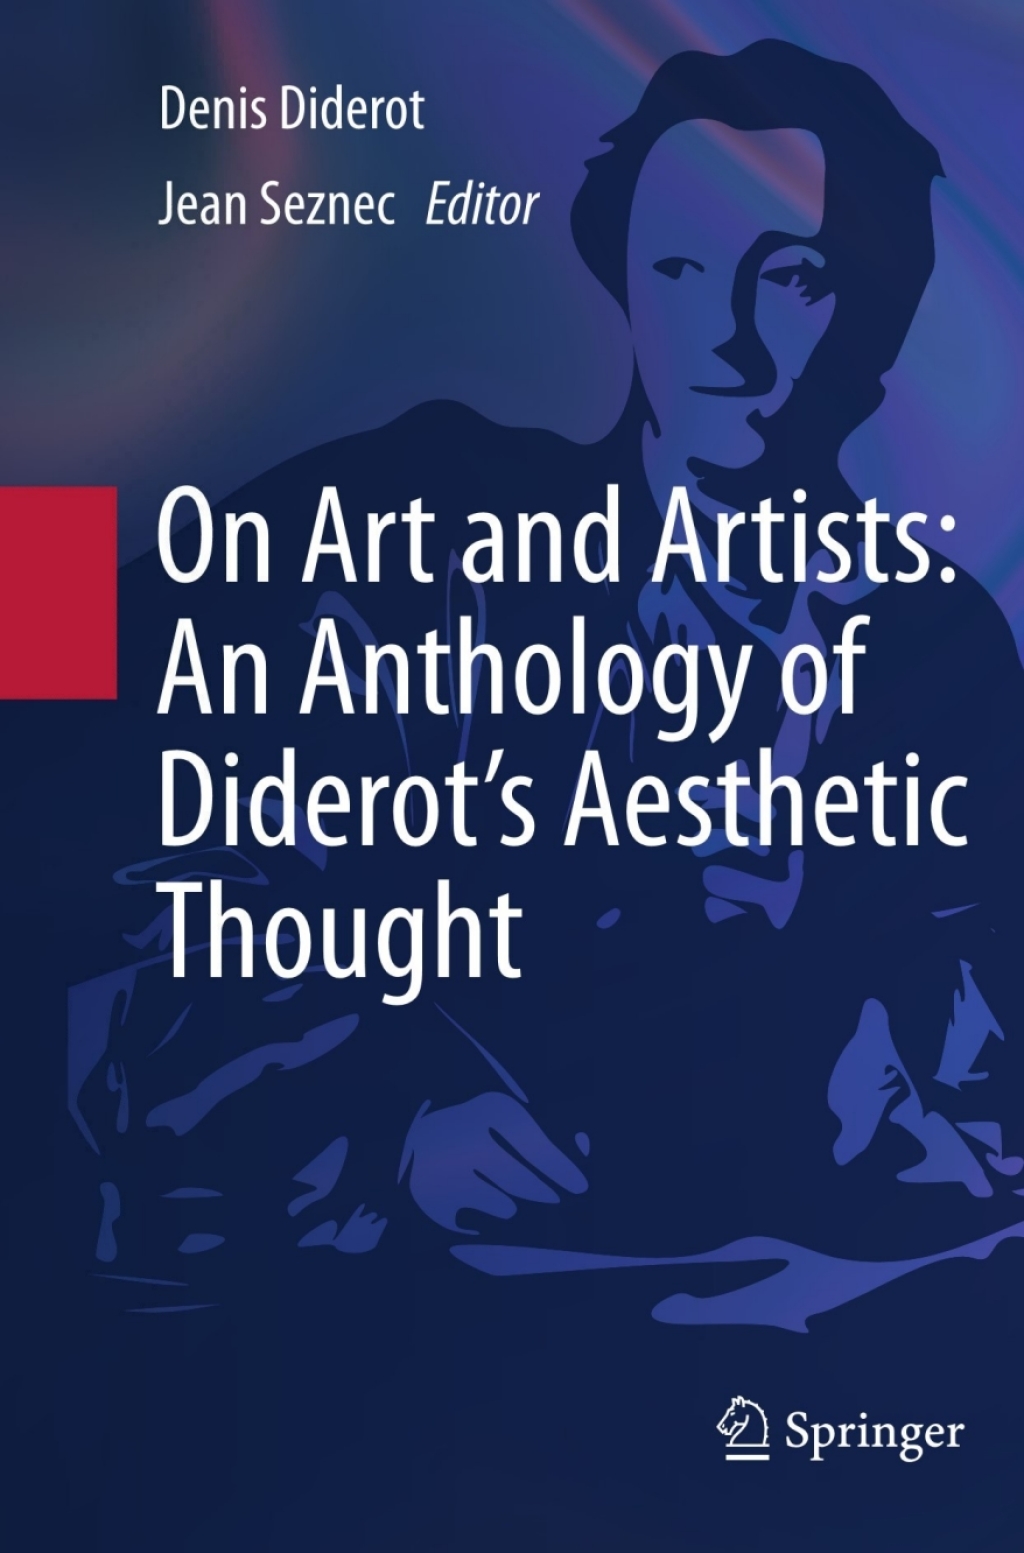 On Art and Artists: An Anthology of Diderot's Aesthetic Thought (eBook) - Denis Diderot,